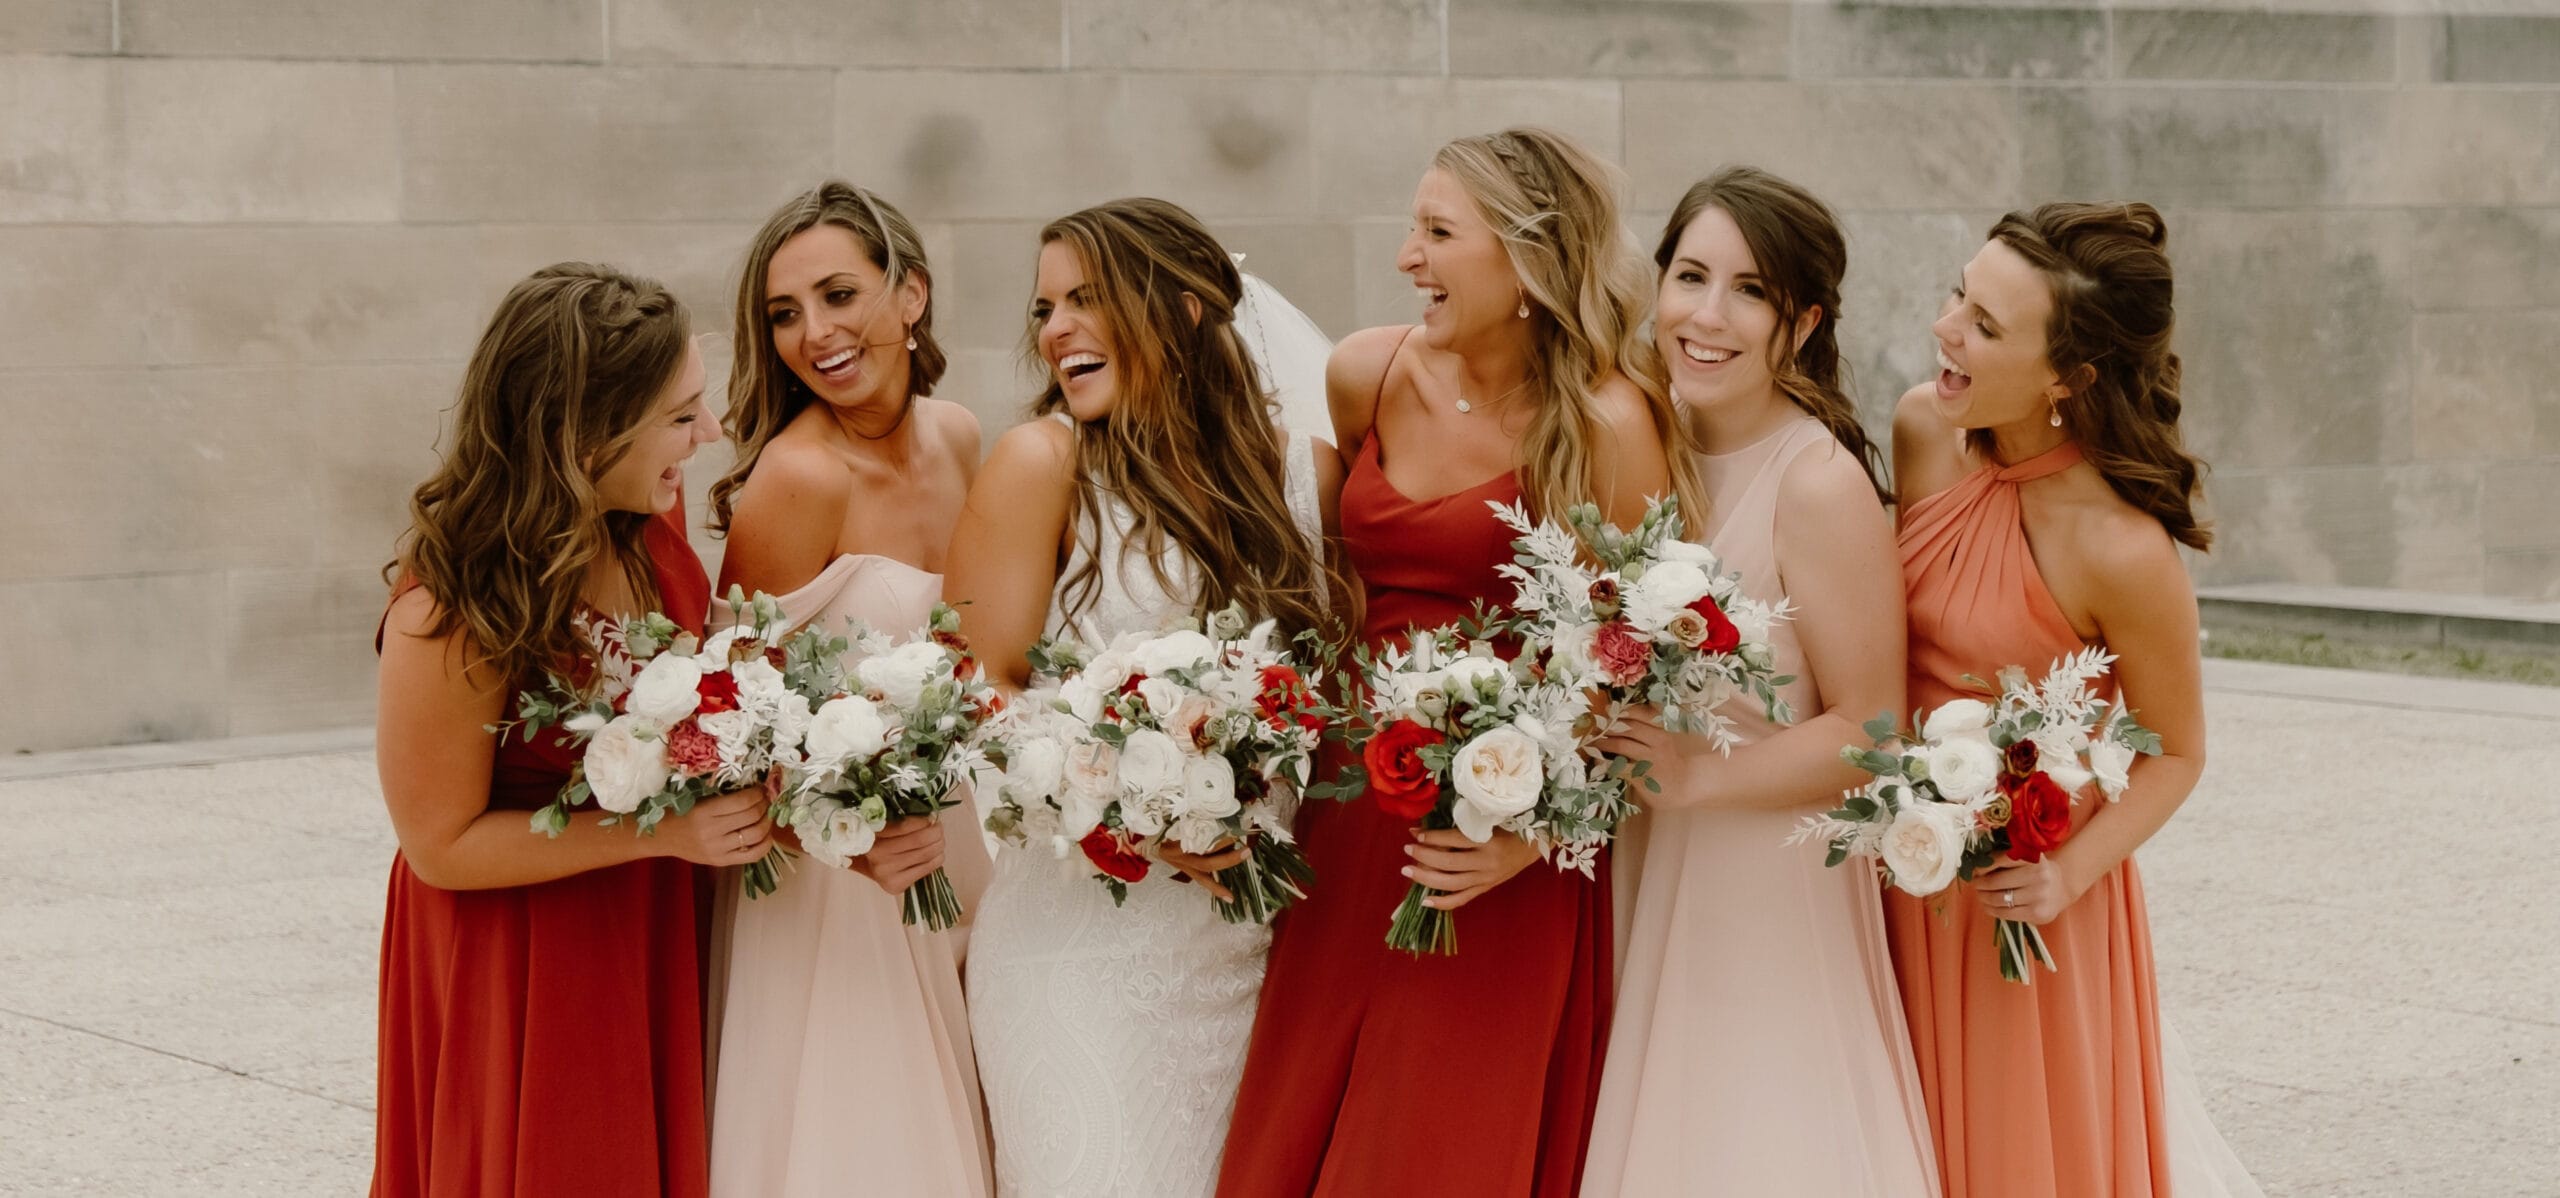 Ways to Help Your Bridal Party Enjoy Your Wedding Day - Wed KC